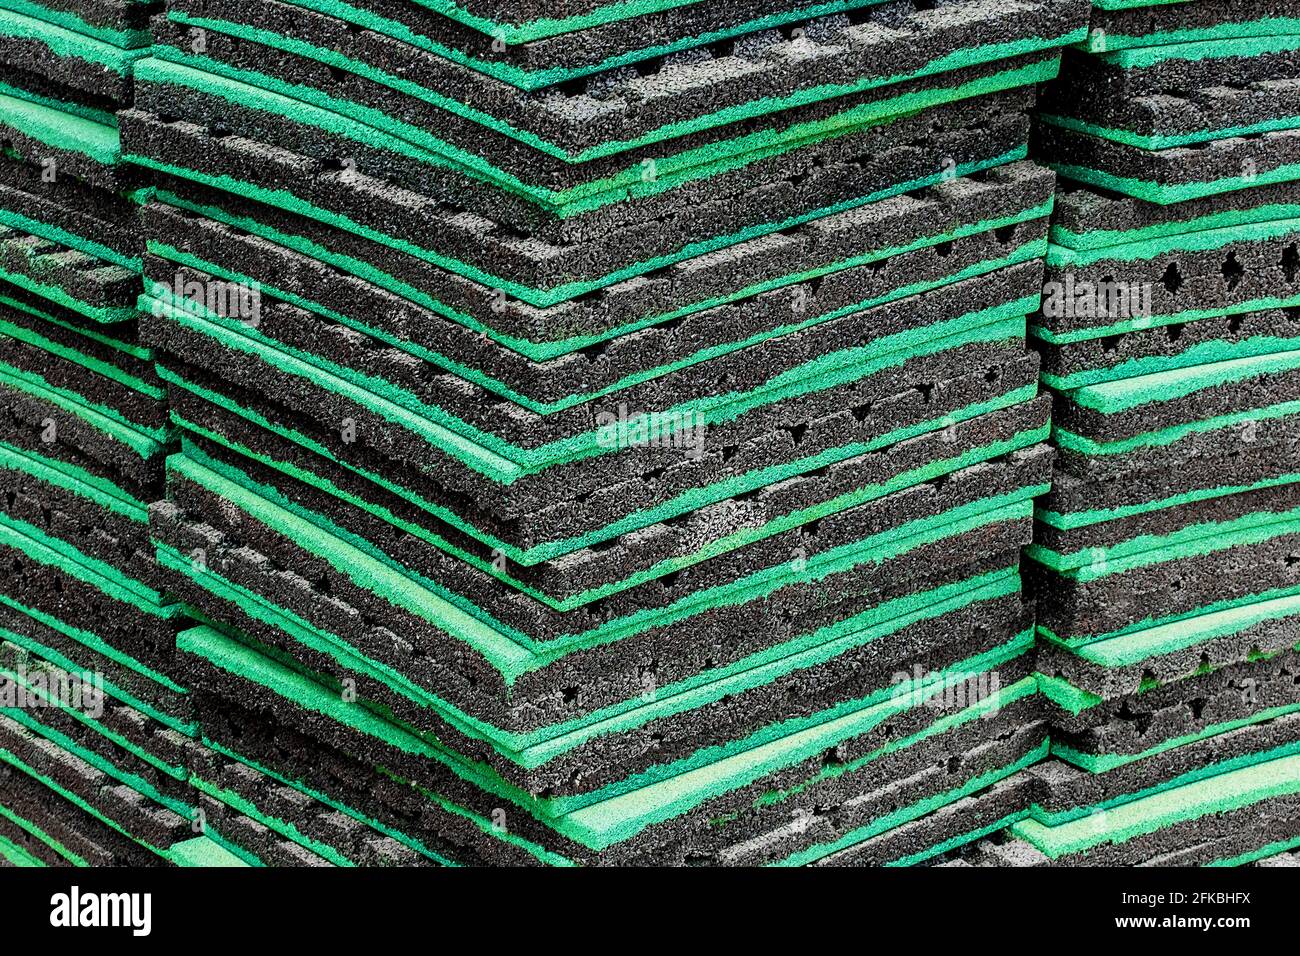 Thermal insulation or soundproof protection industrial building heat material, close up. Stock Photo